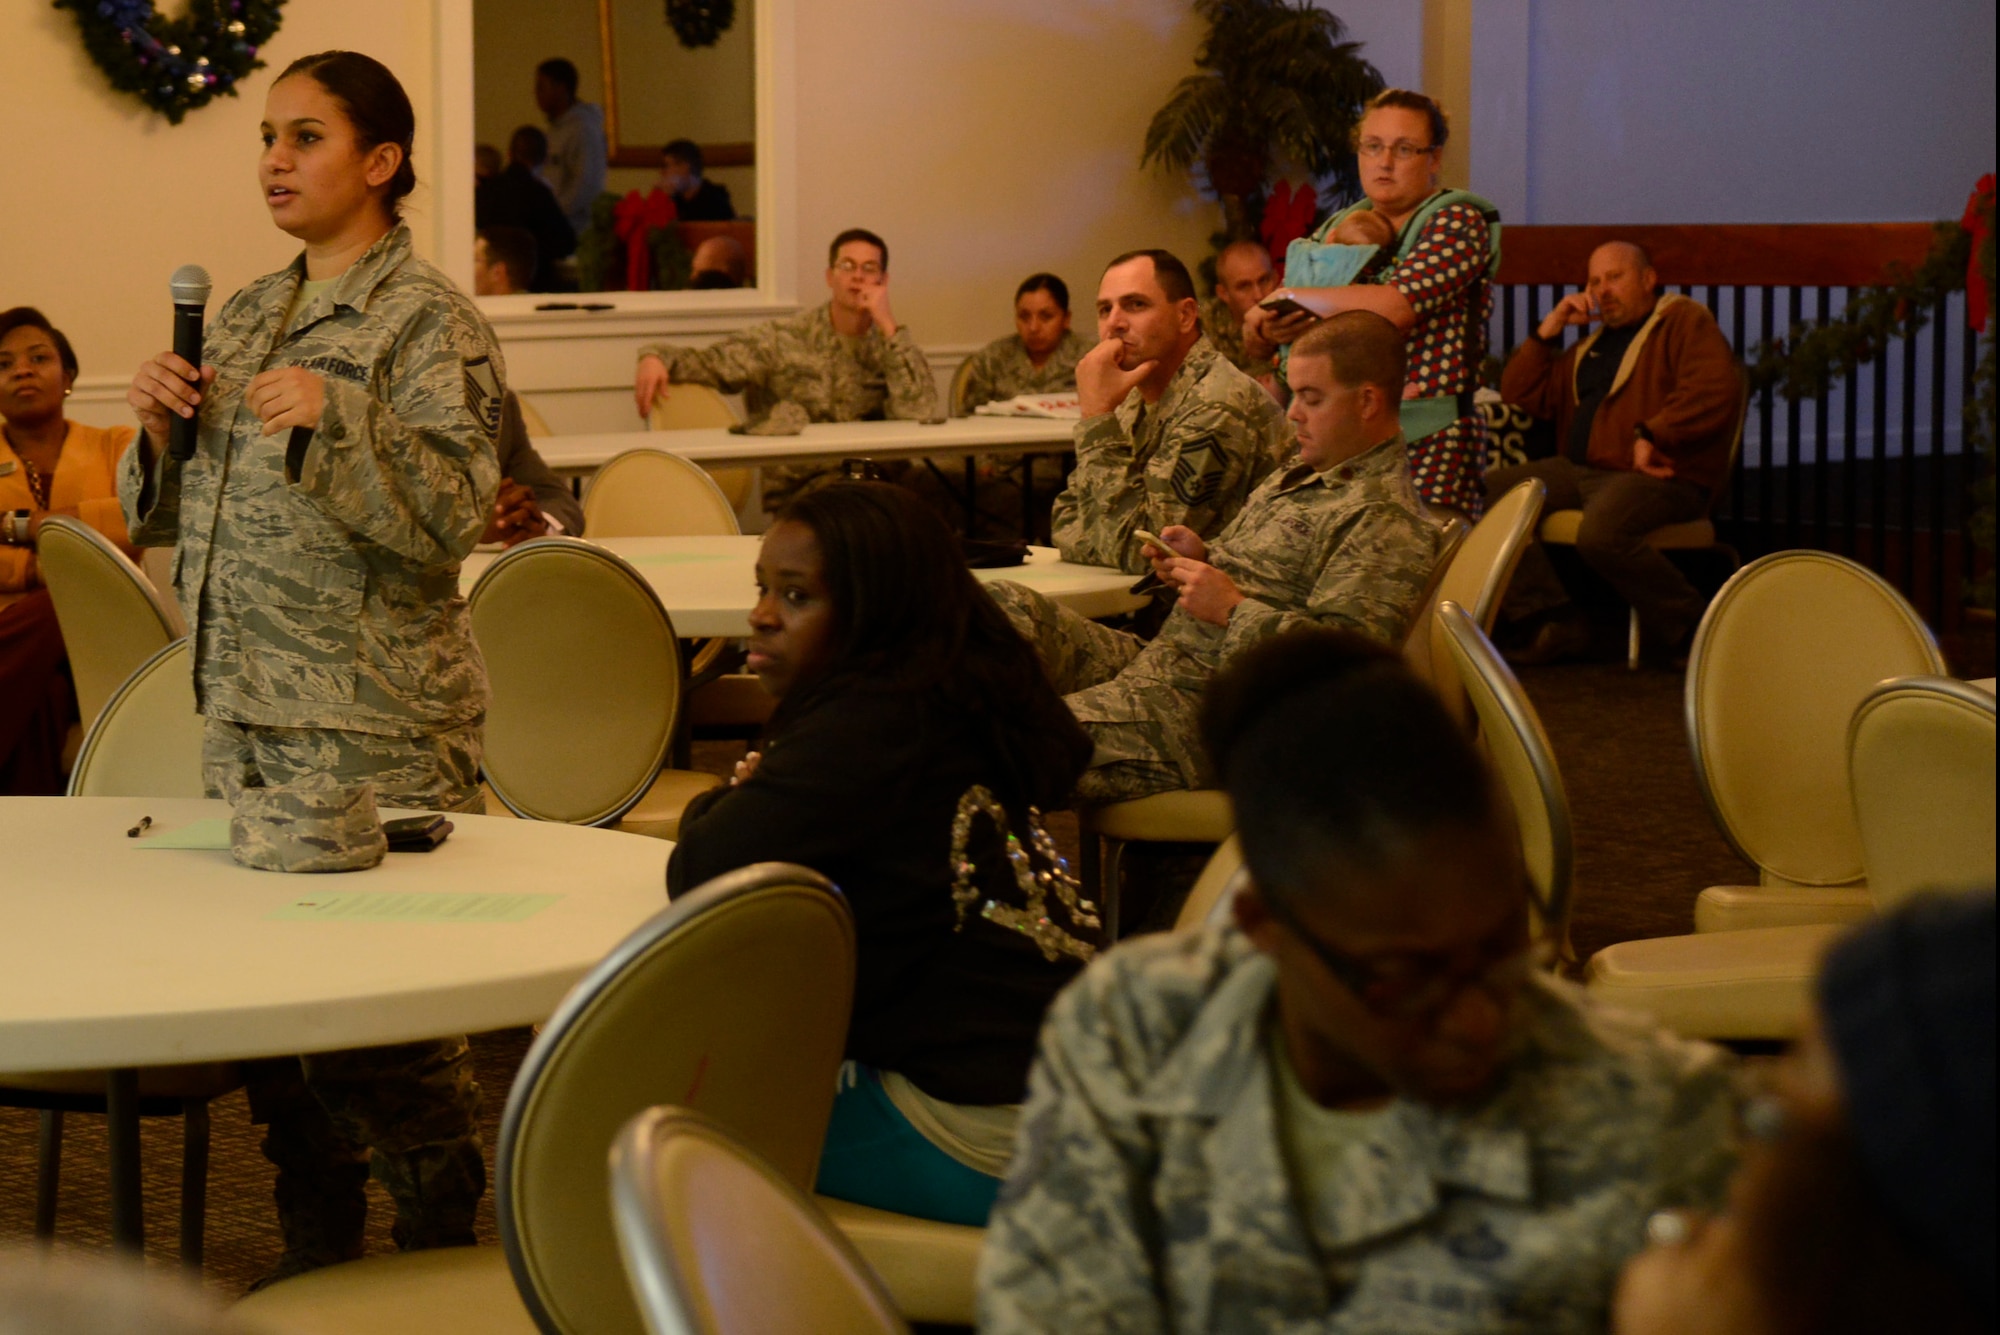 A Team Shaw member asks a question during the 20th Fighter Wing Town Hall meeting at Shaw Air Force Base, S.C., Nov. 29, 2016. Town hall meetings give Team Shaw members the opportunity to voice concerns directly to Shaw leaders. (U.S. Air Force photo by Airman 1st Class BrieAnna Stillman)